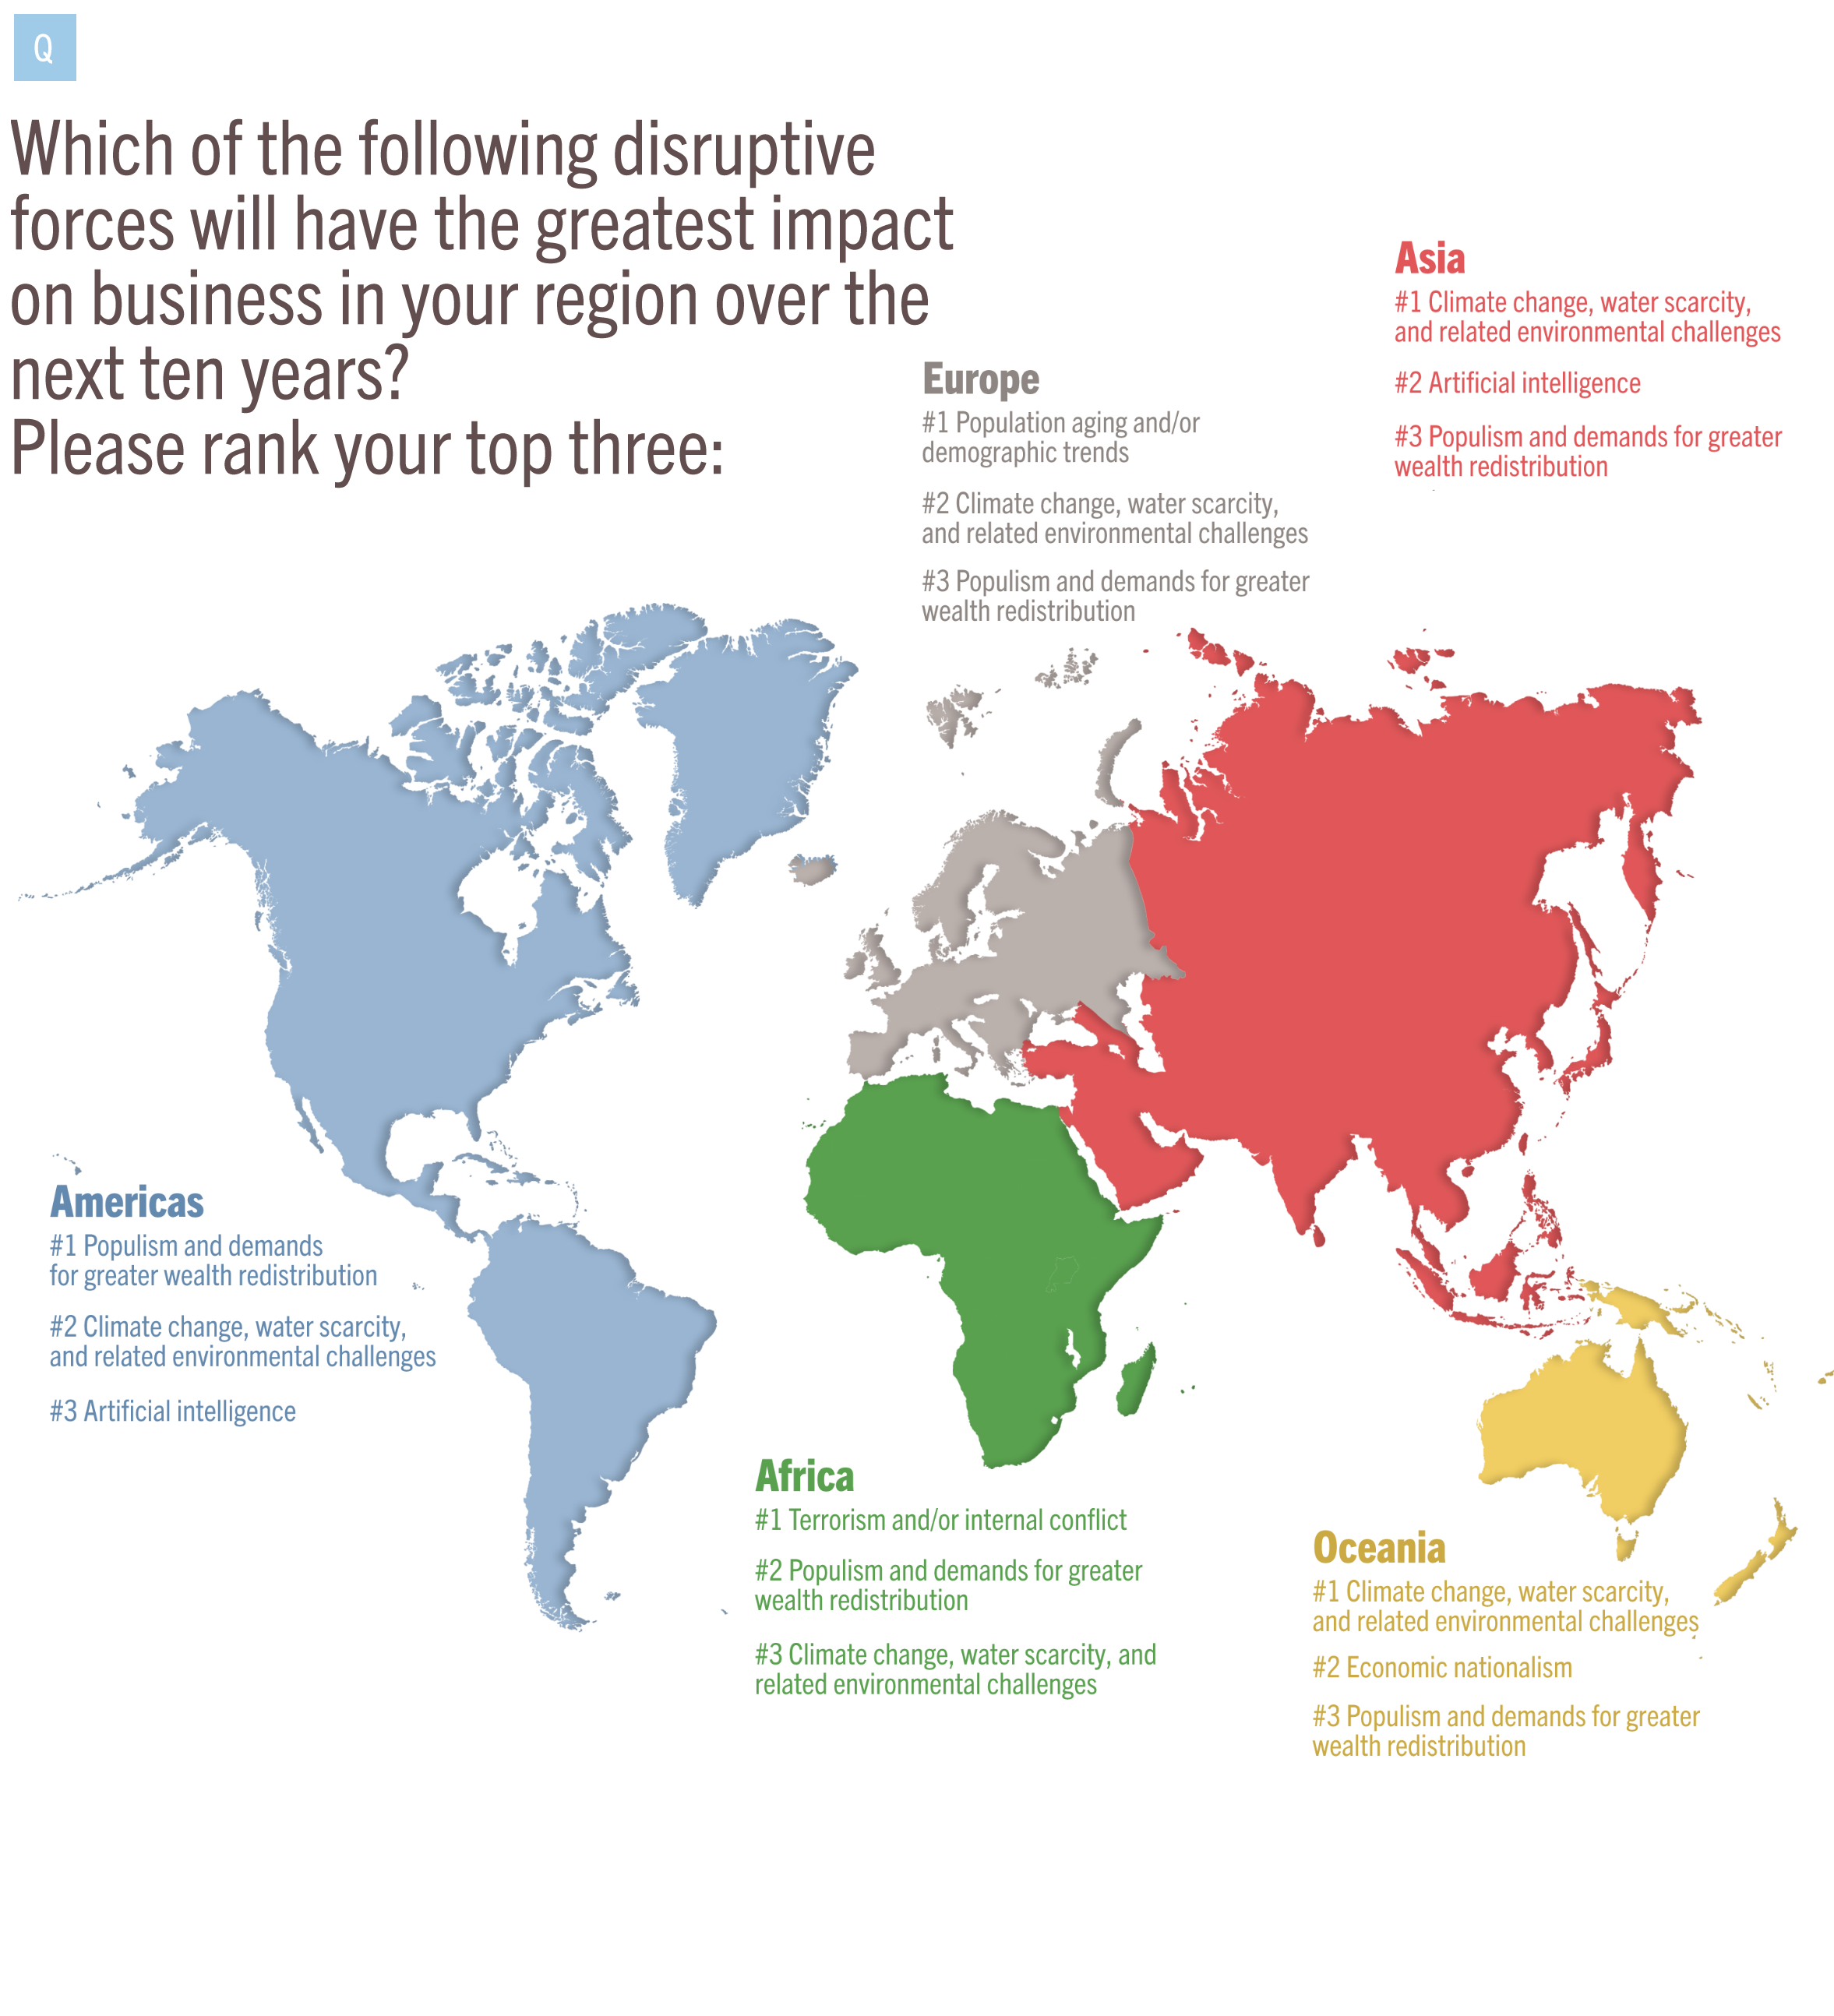 Infographic of importance of disruptive changes by region